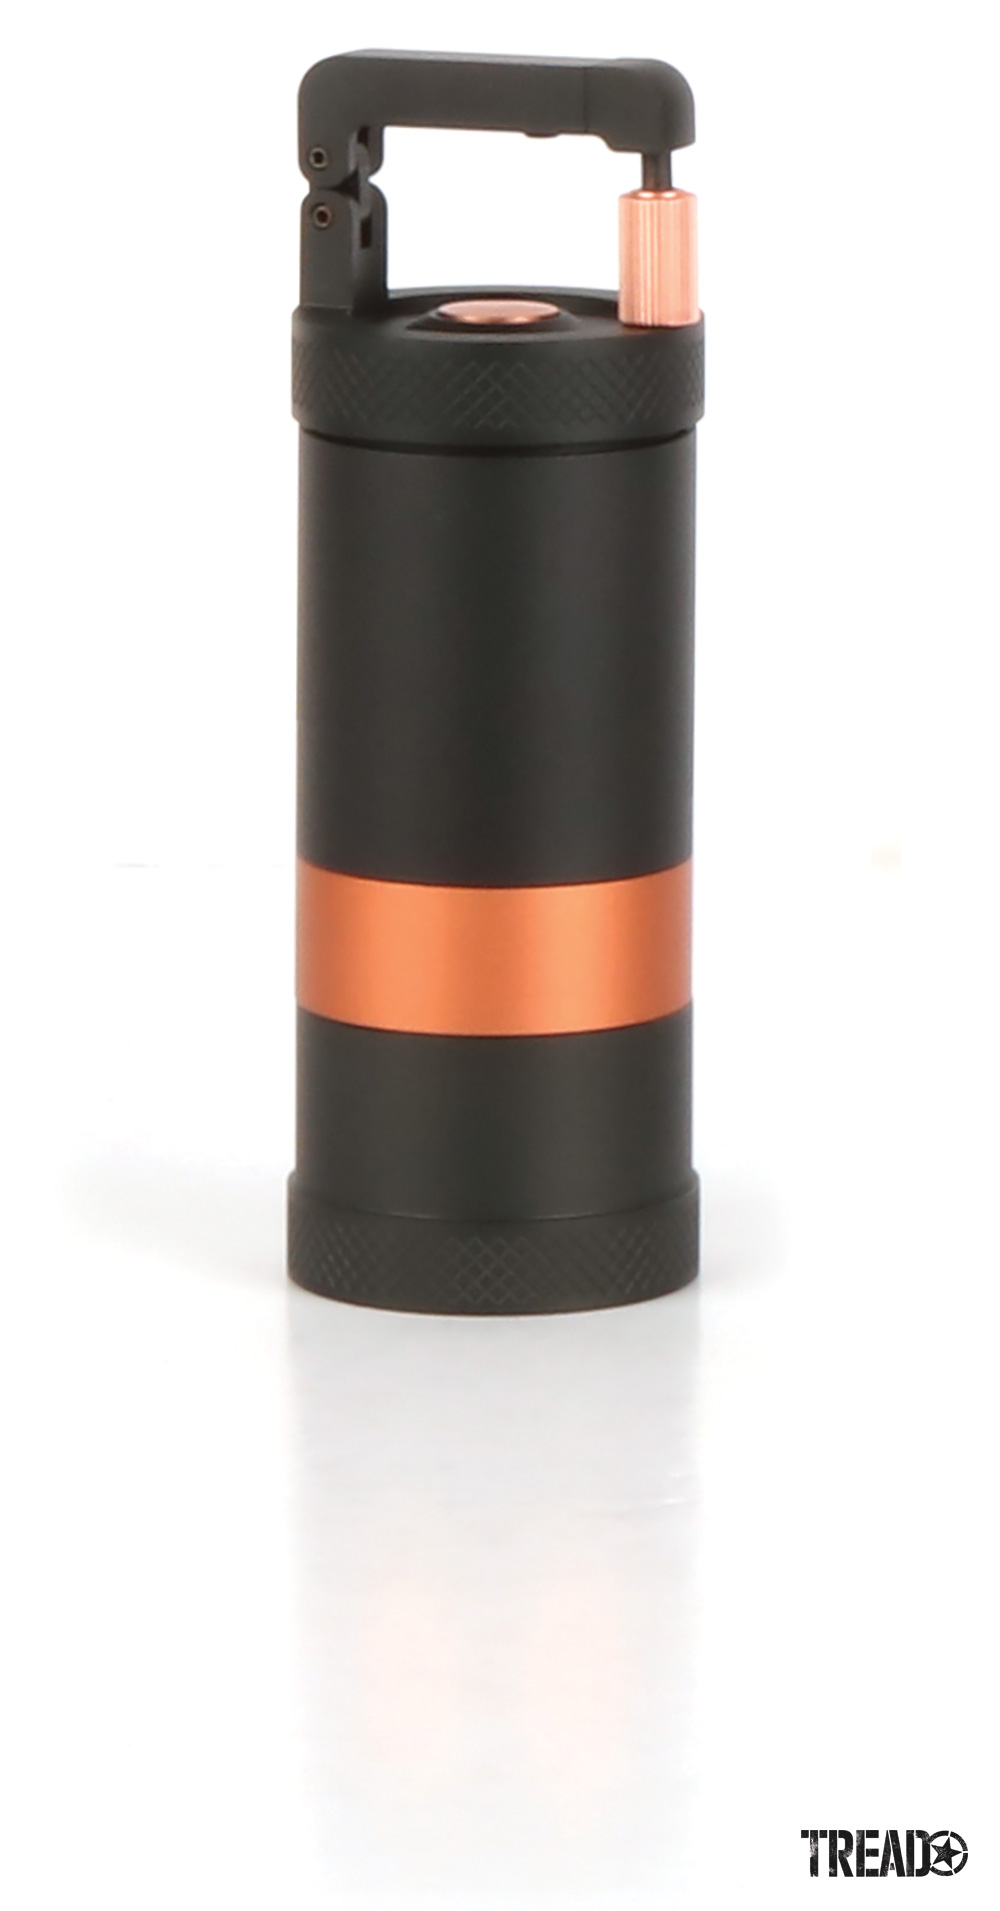 Black and copper-colored VSSL/Java Coffee Grinder with built-in carabiner